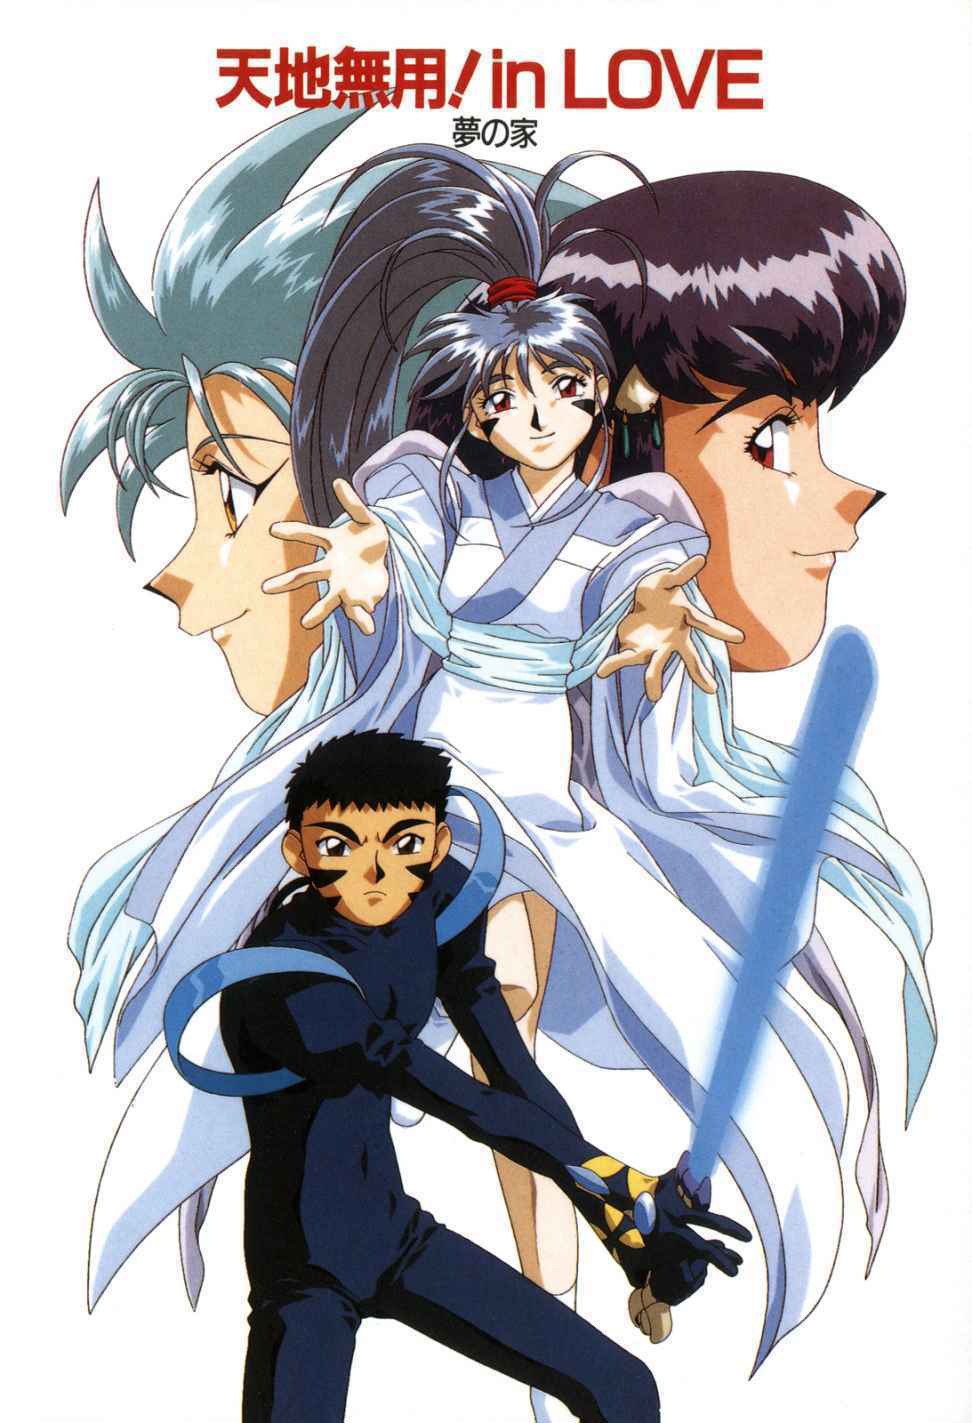 Jala-chan's Place Ep 39: Tenchi Muyo! In Love